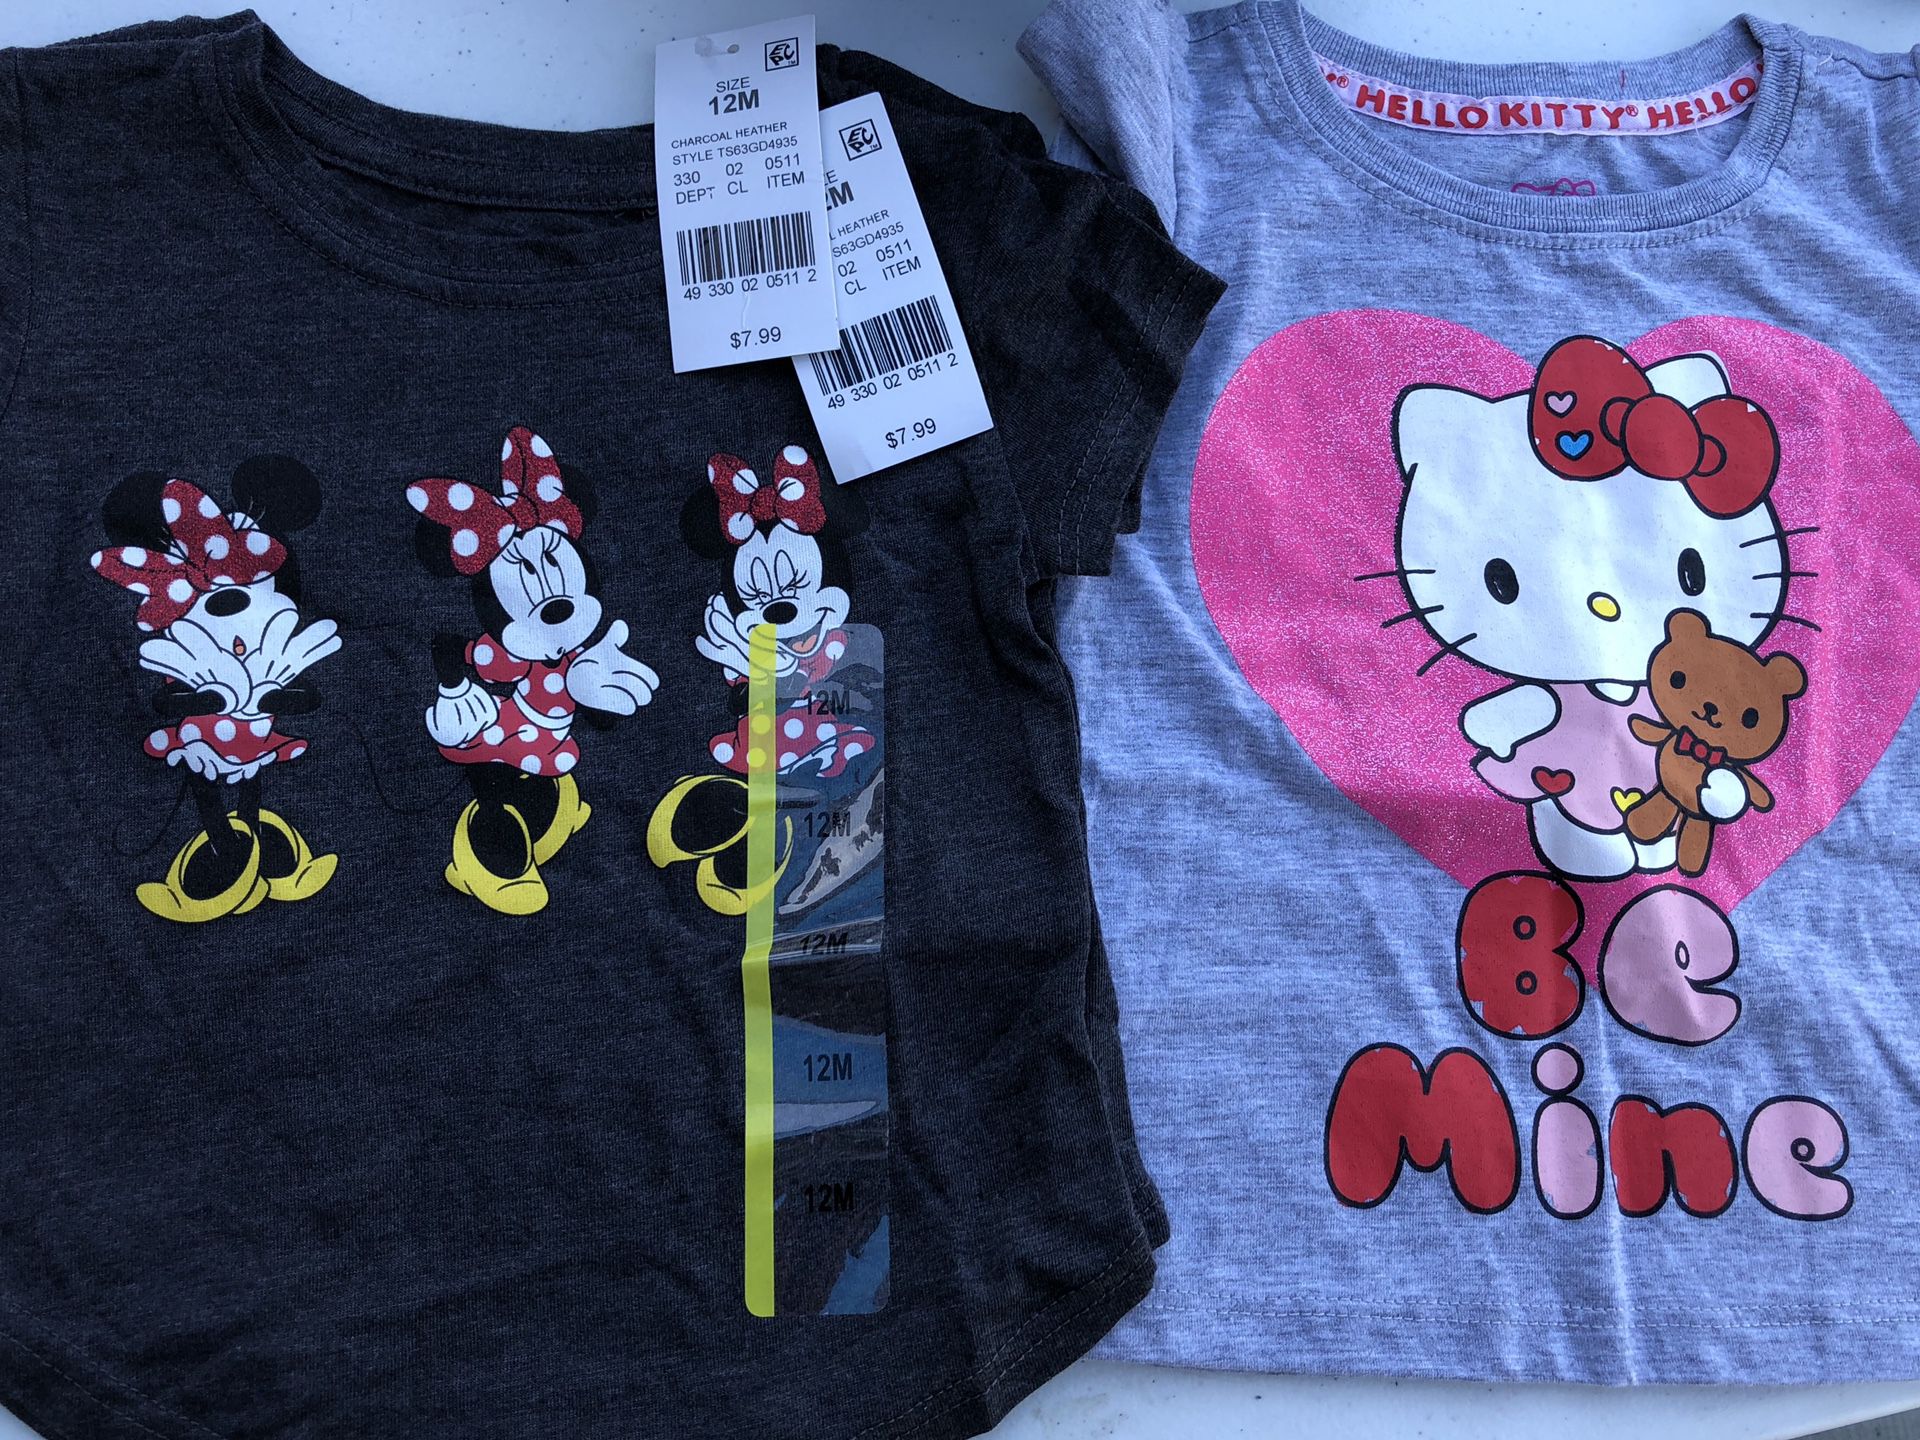 Minnie or hello kitty kids shirts sizes vary 12months,18 months,2T & 3T only $3 each located in Fresno on peach/Kingscanyon